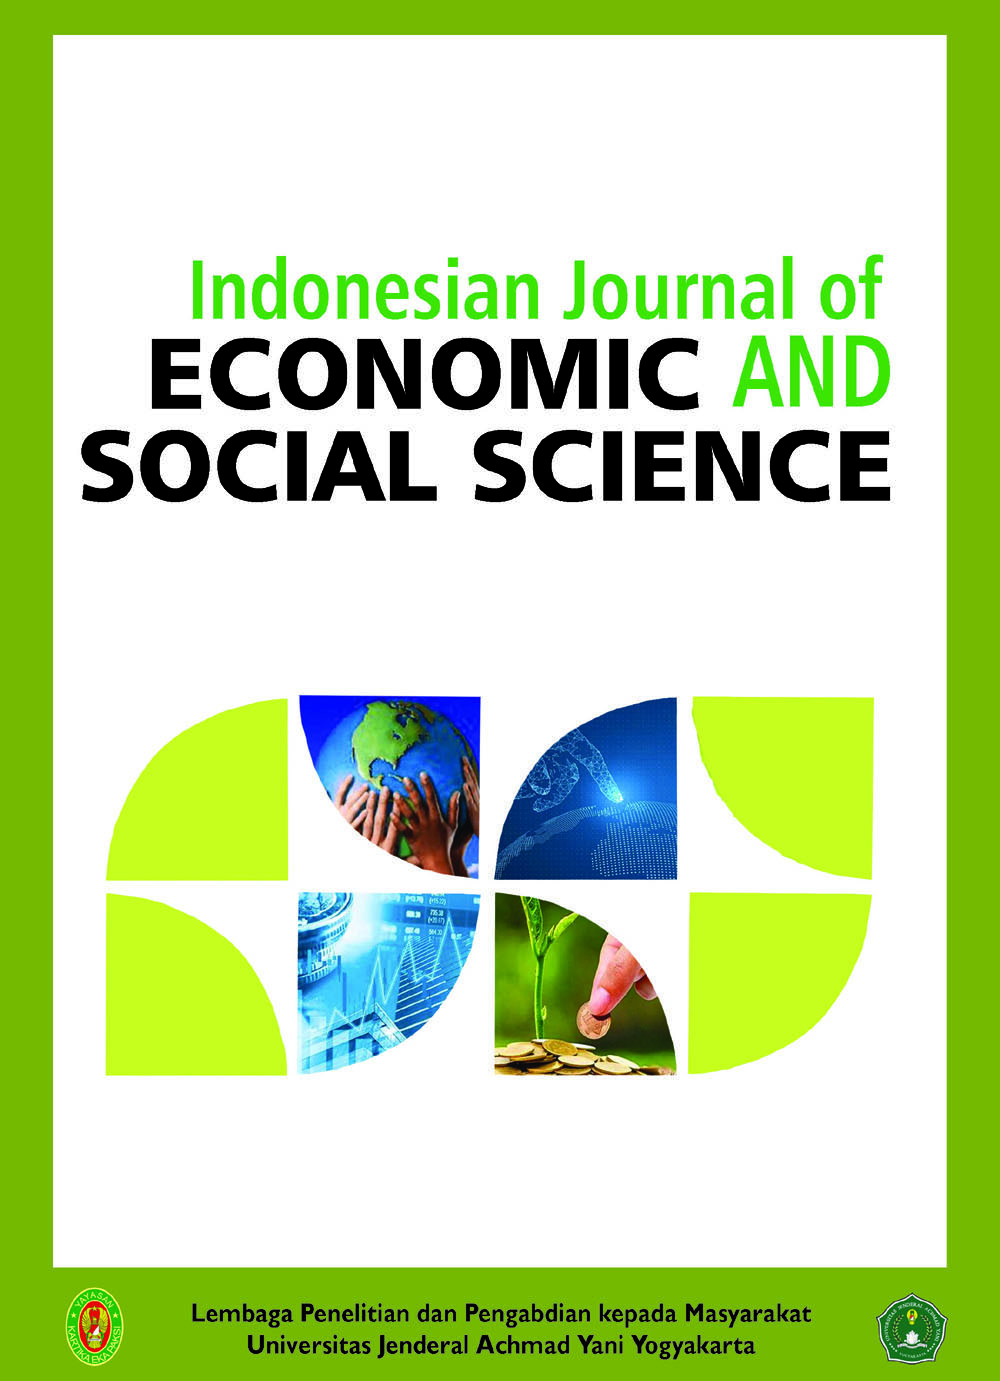 Inonesian Journal of Economic and Social Science